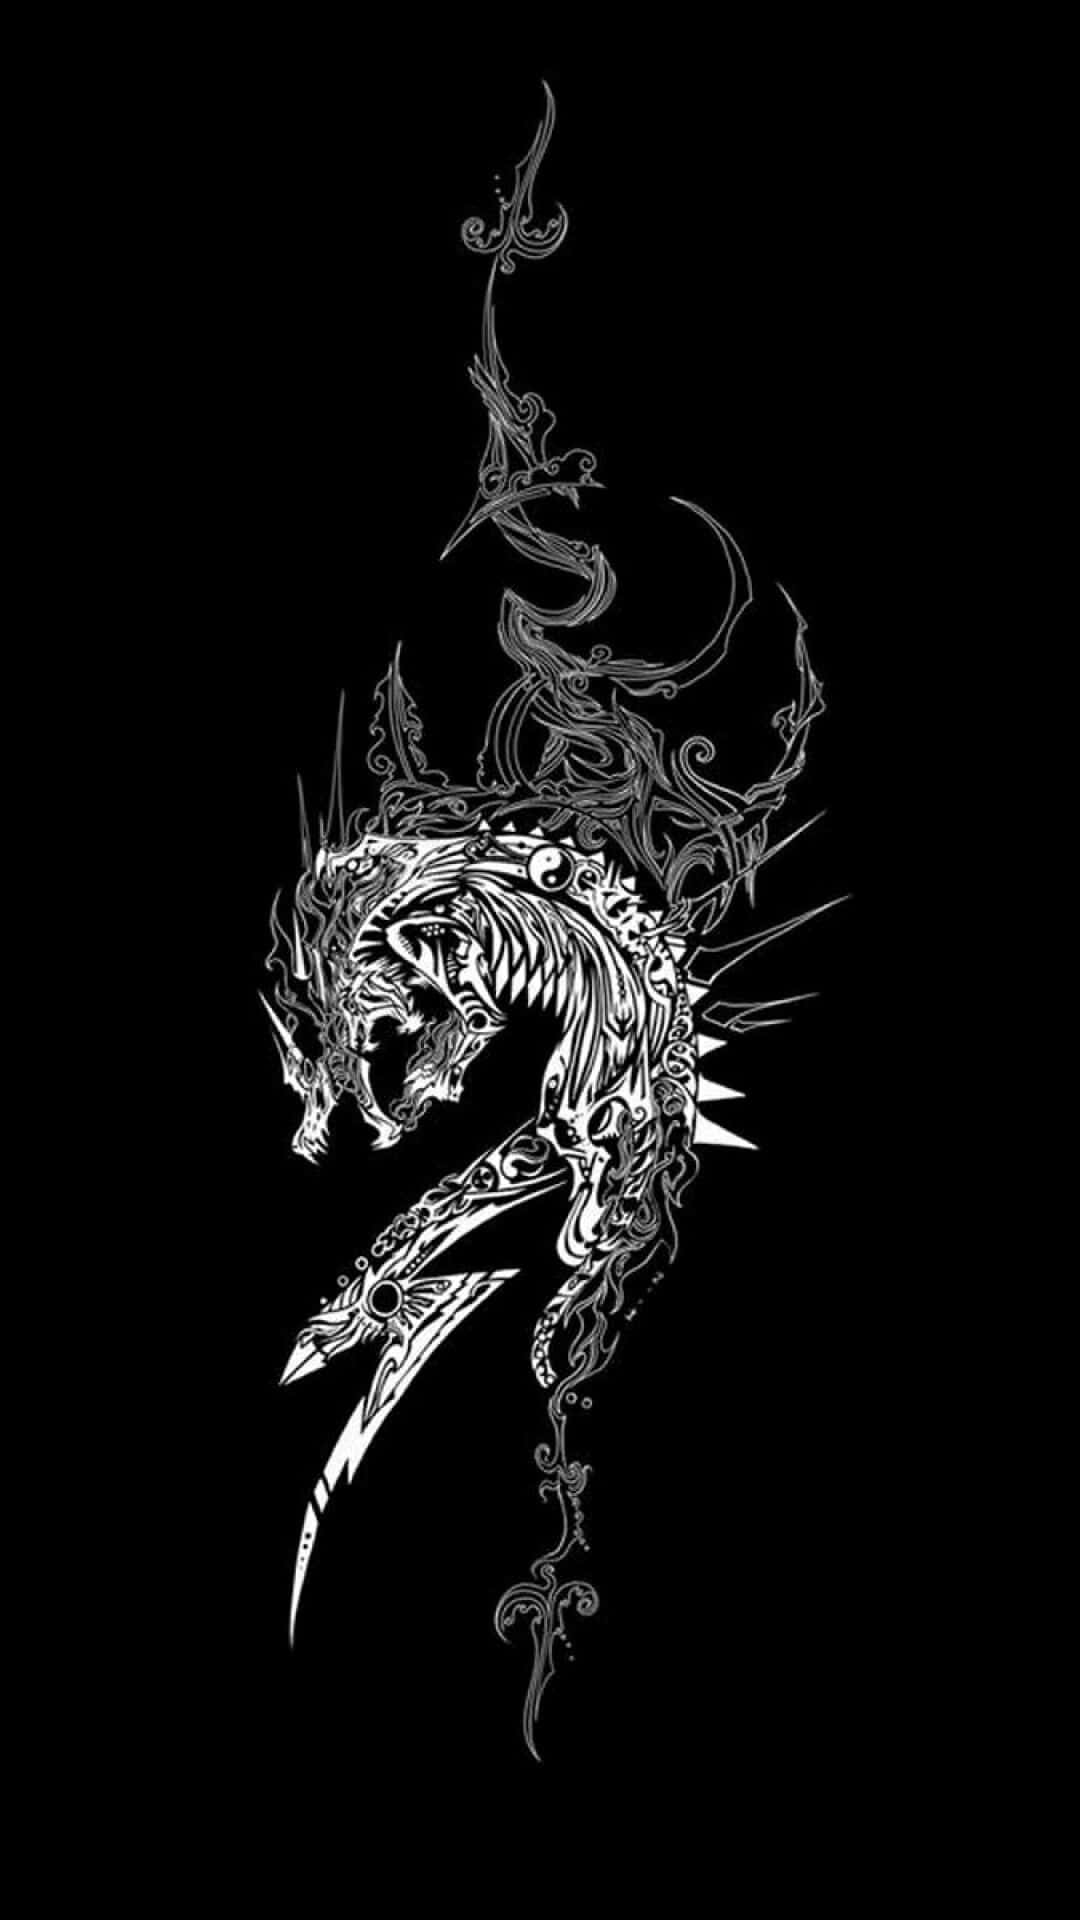 Stand out with this Dark Japanese iPhone Wallpaper